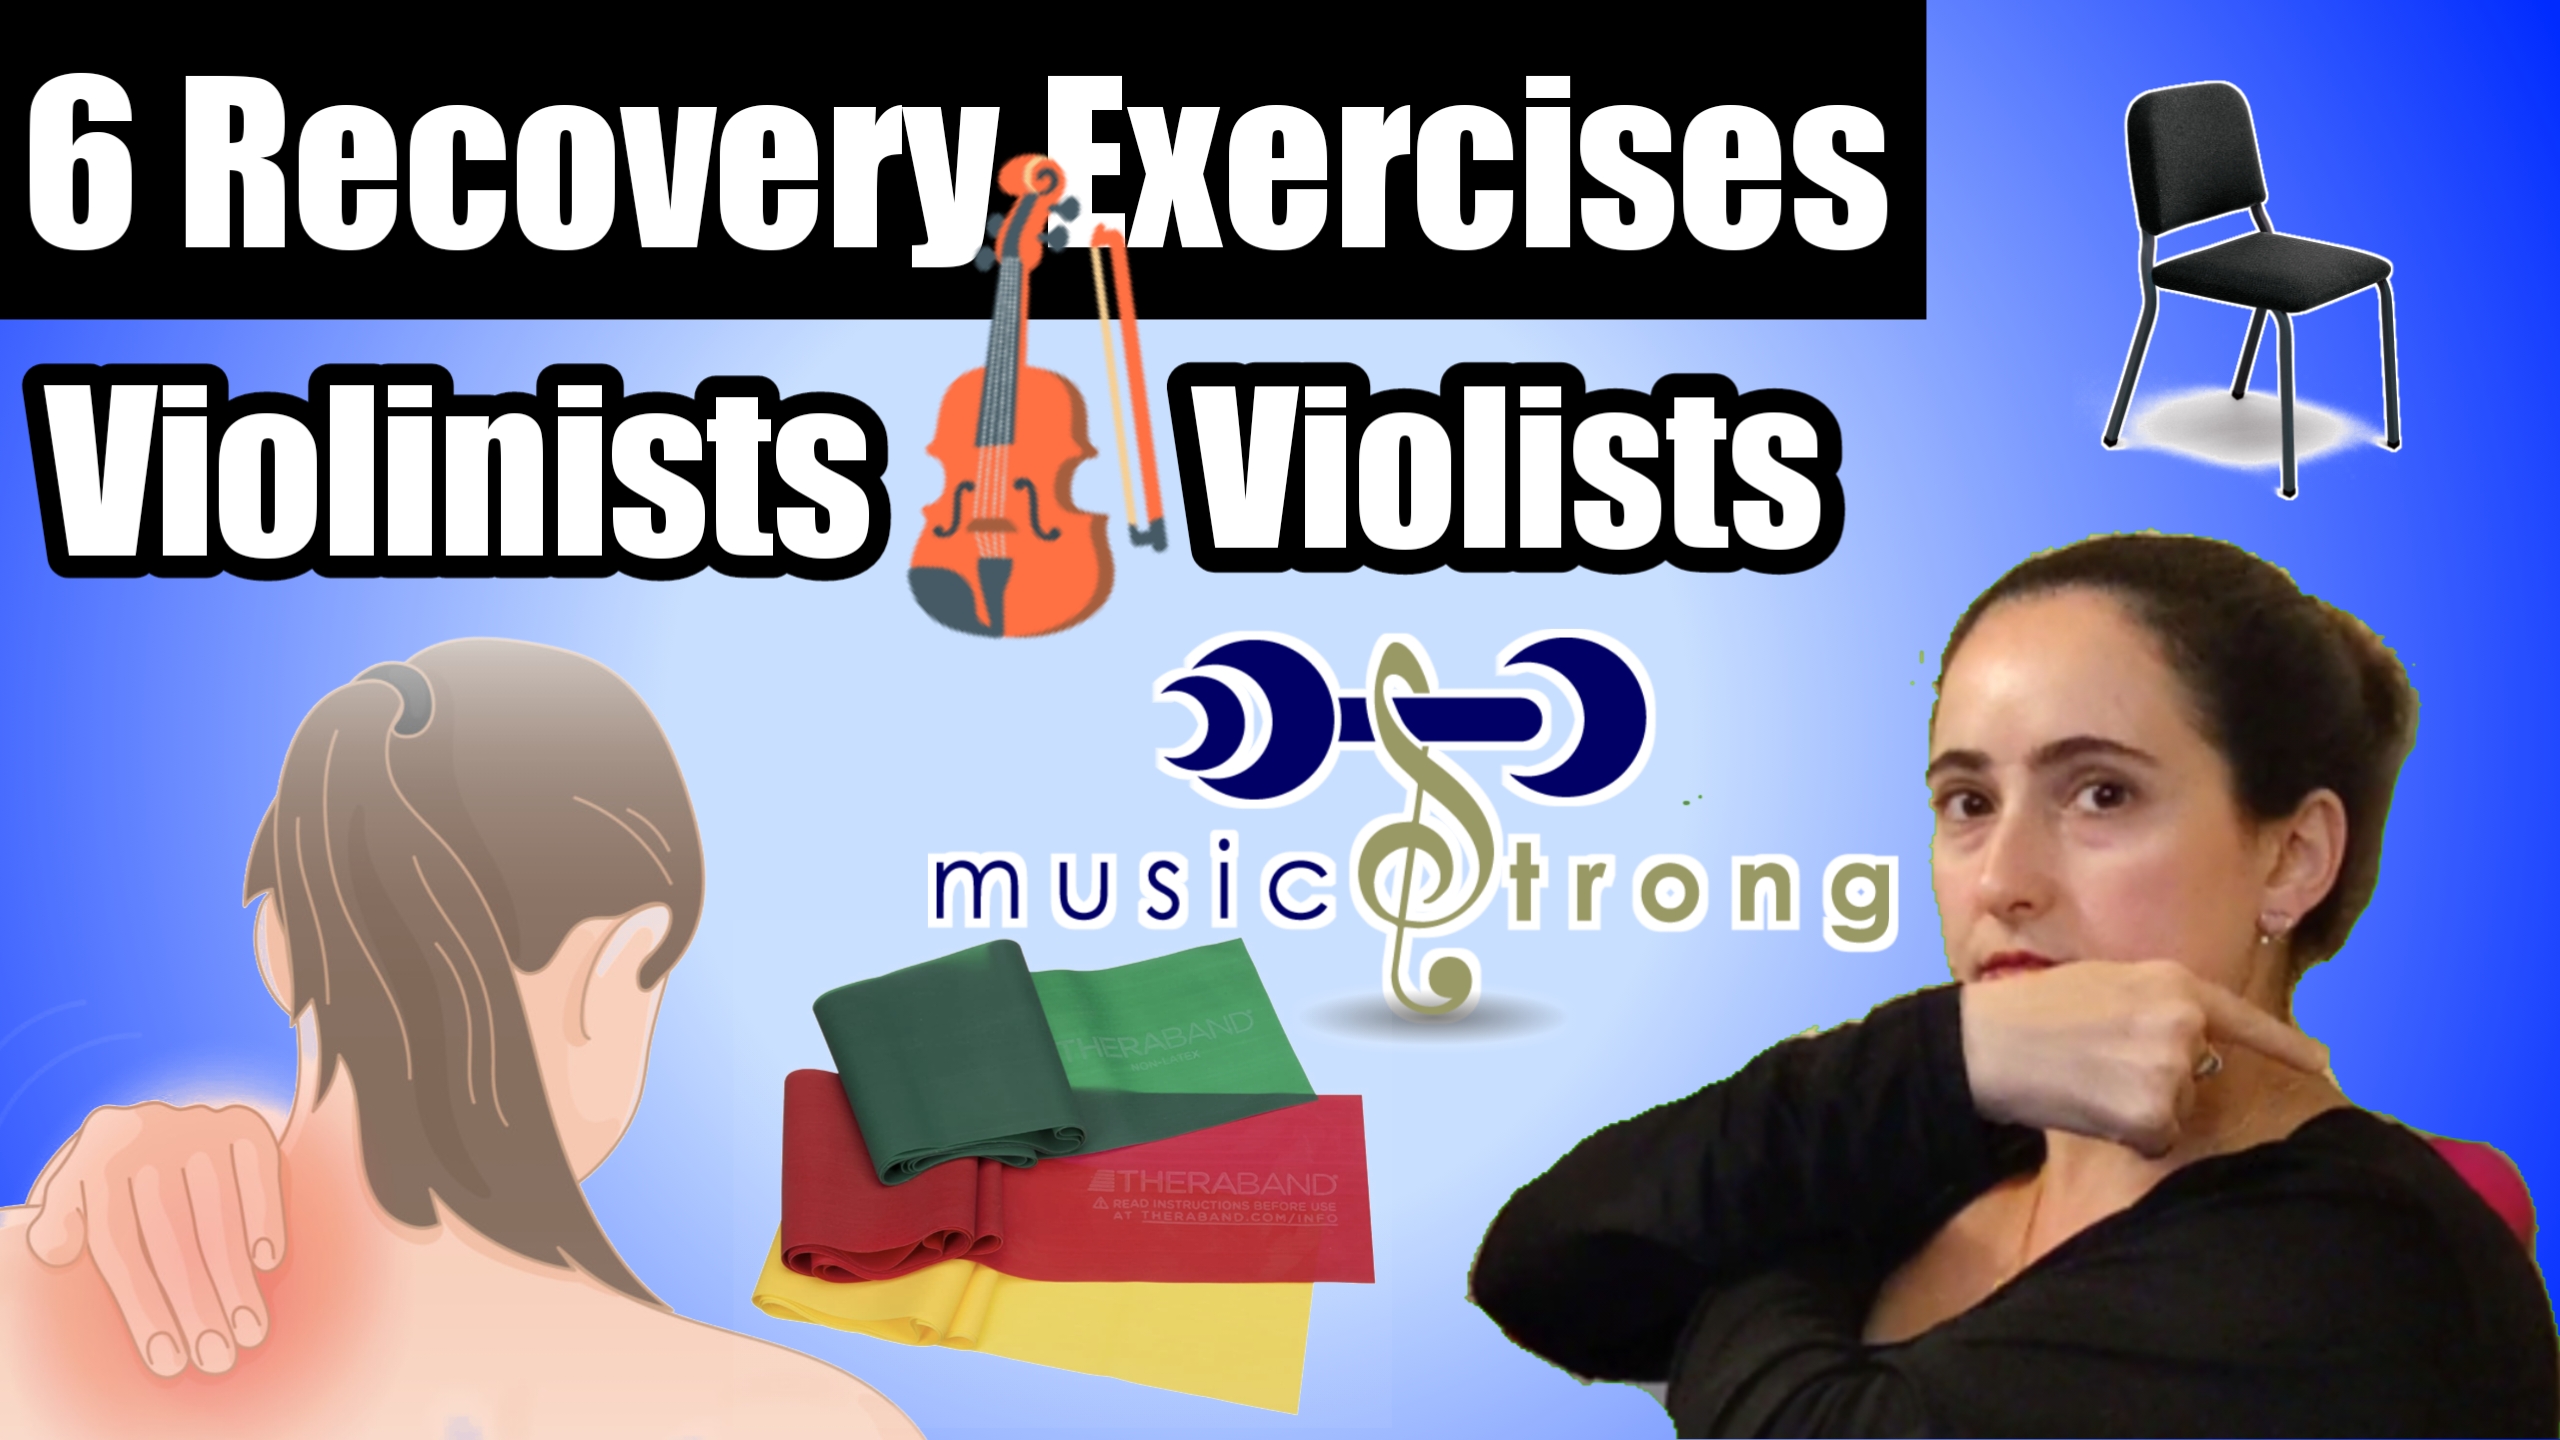 6 recovery exercises